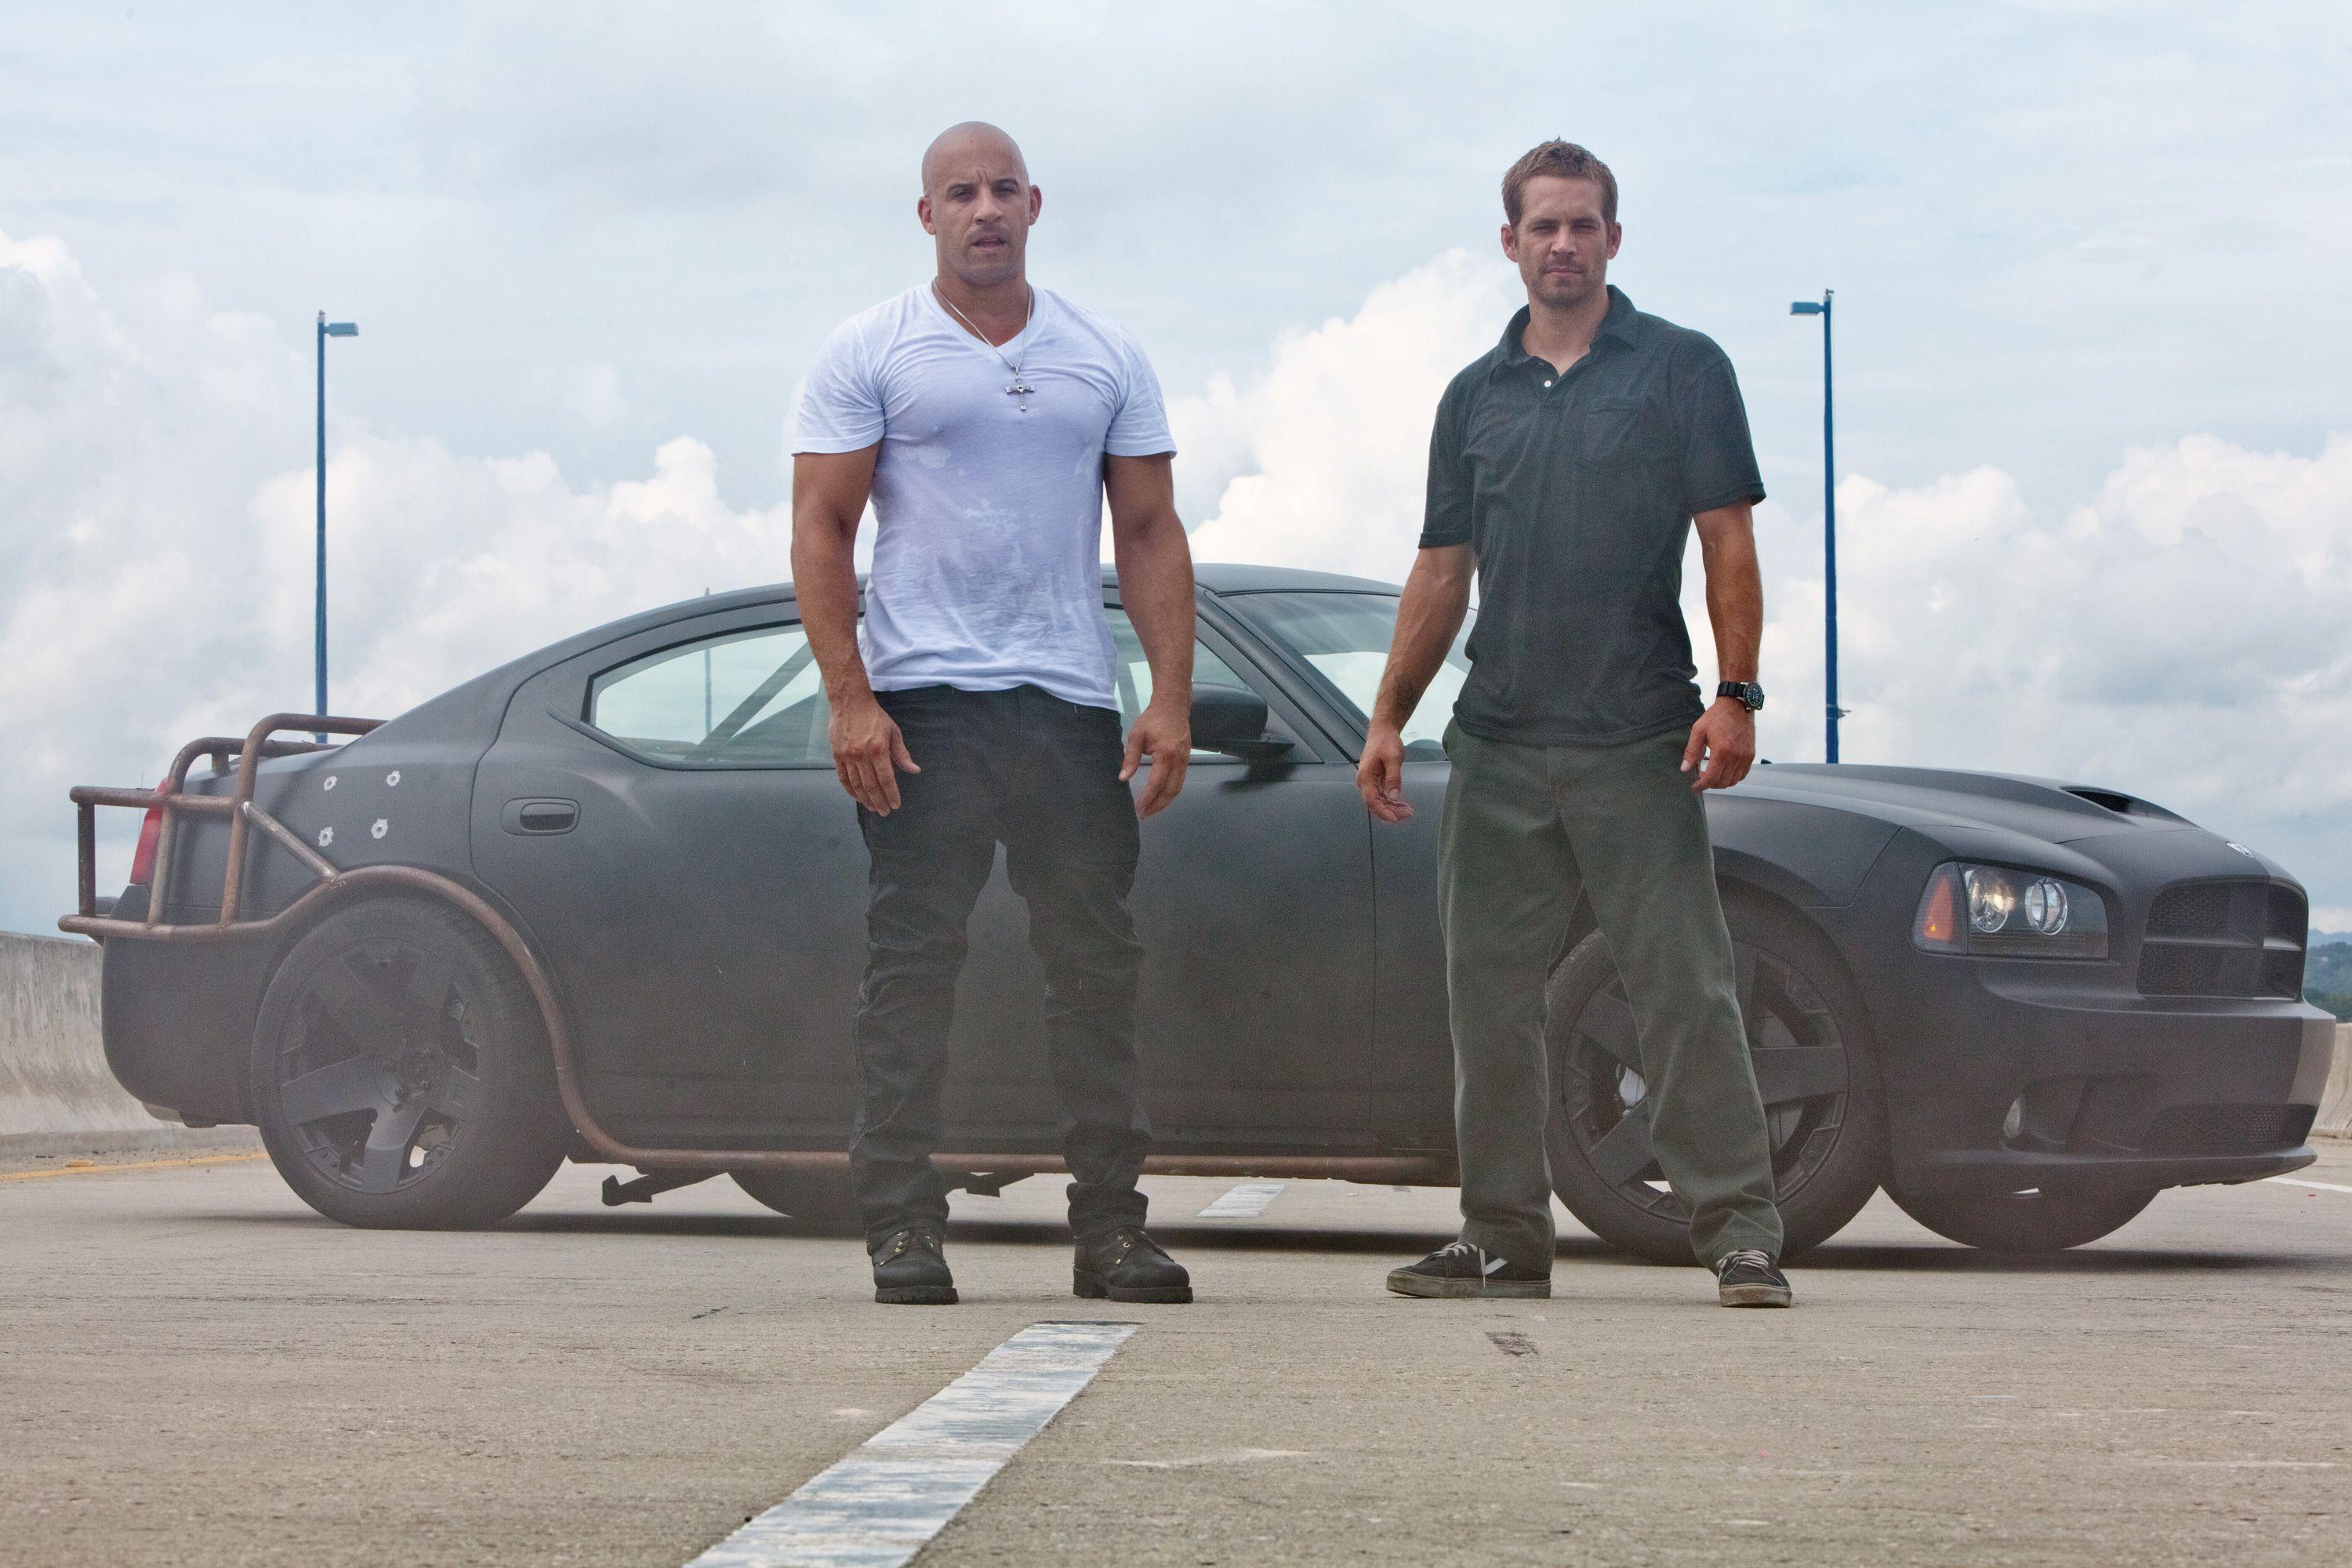 FAST FIVE Movie Image FAST AND THE FURIOUS 5 Image.